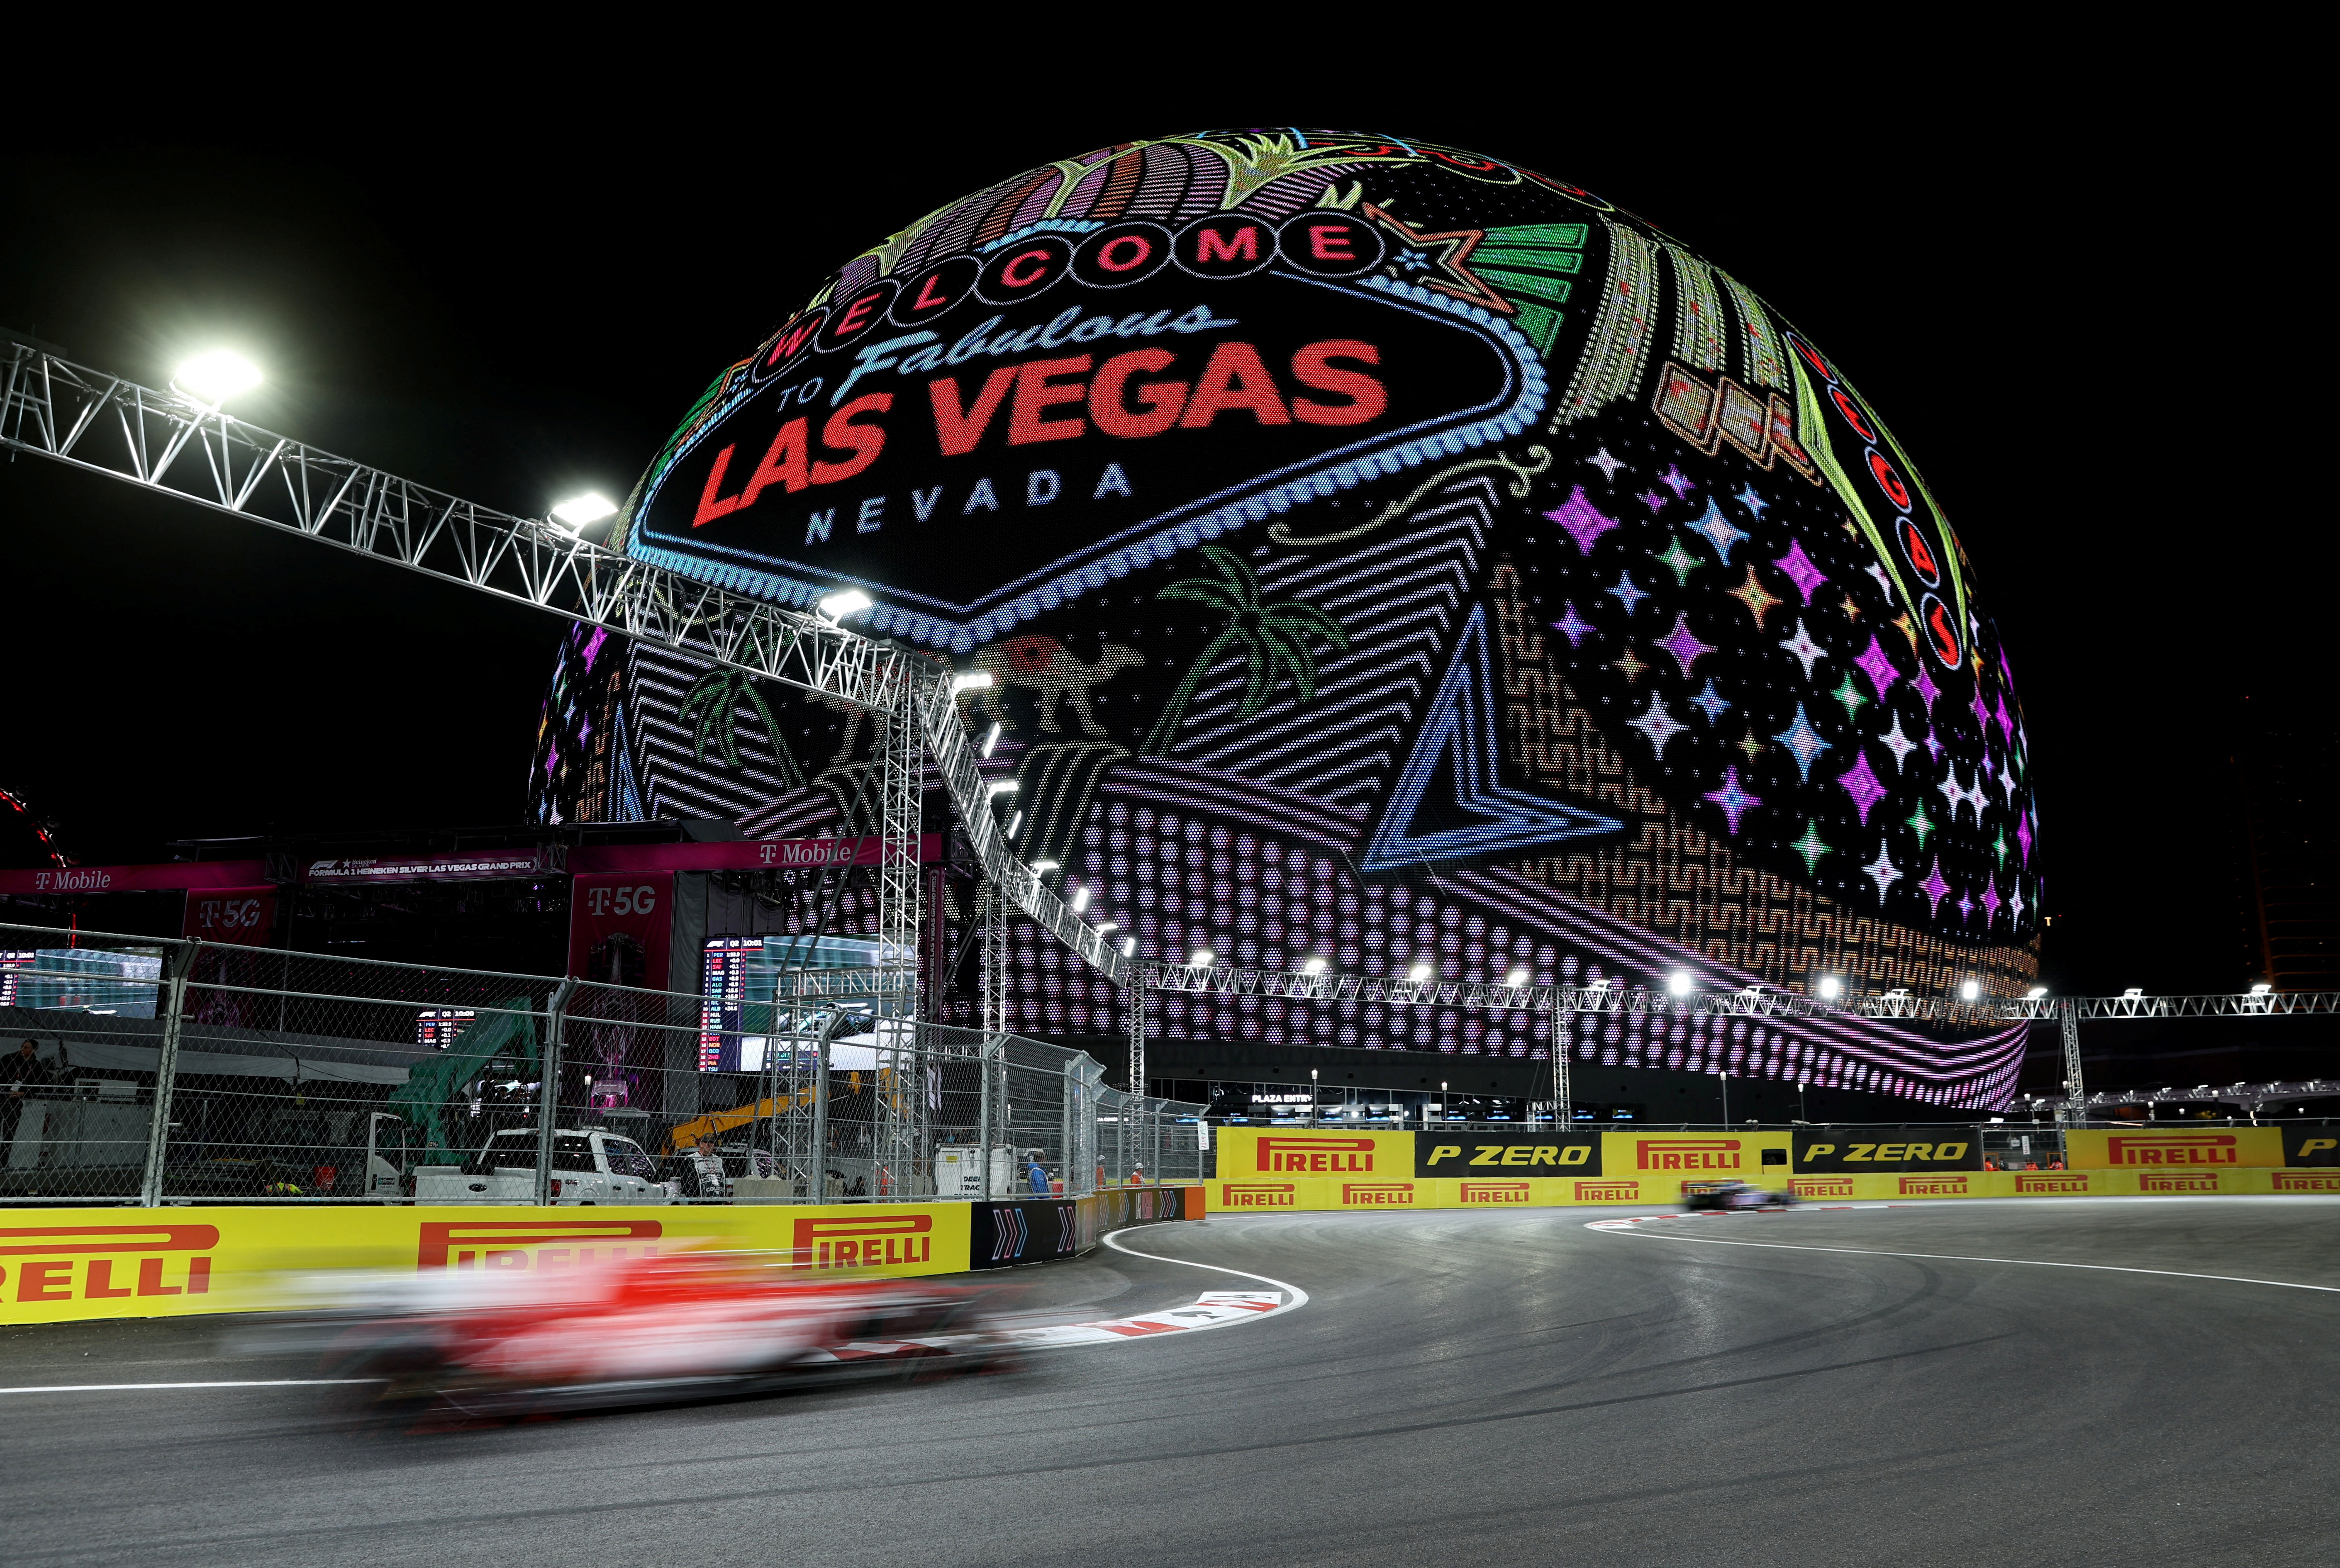 LAS VEGAS GRAND PRIX: Everything you need to know about F1's newest race